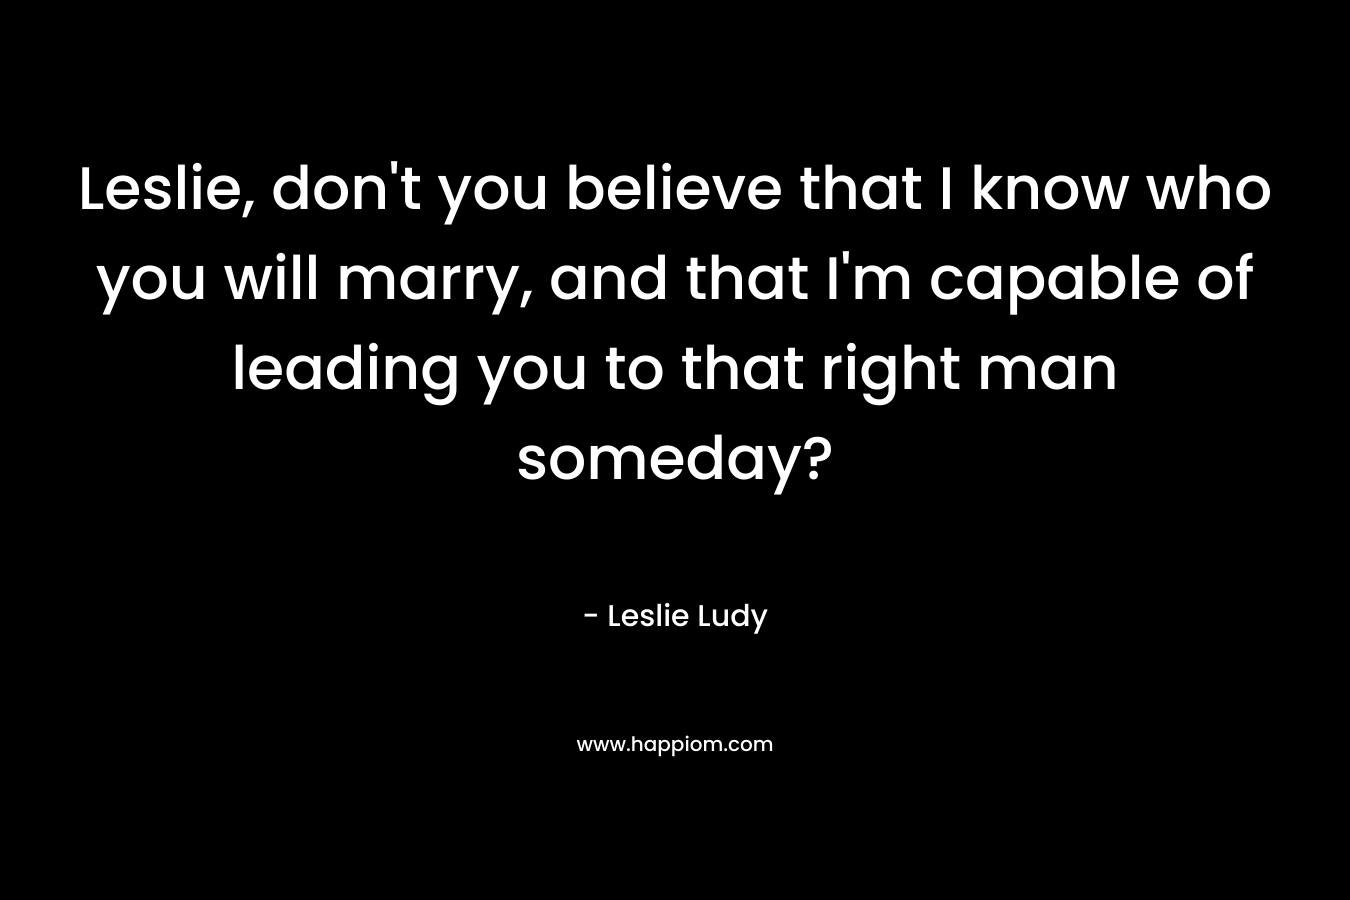 Leslie, don't you believe that I know who you will marry, and that I'm capable of leading you to that right man someday?